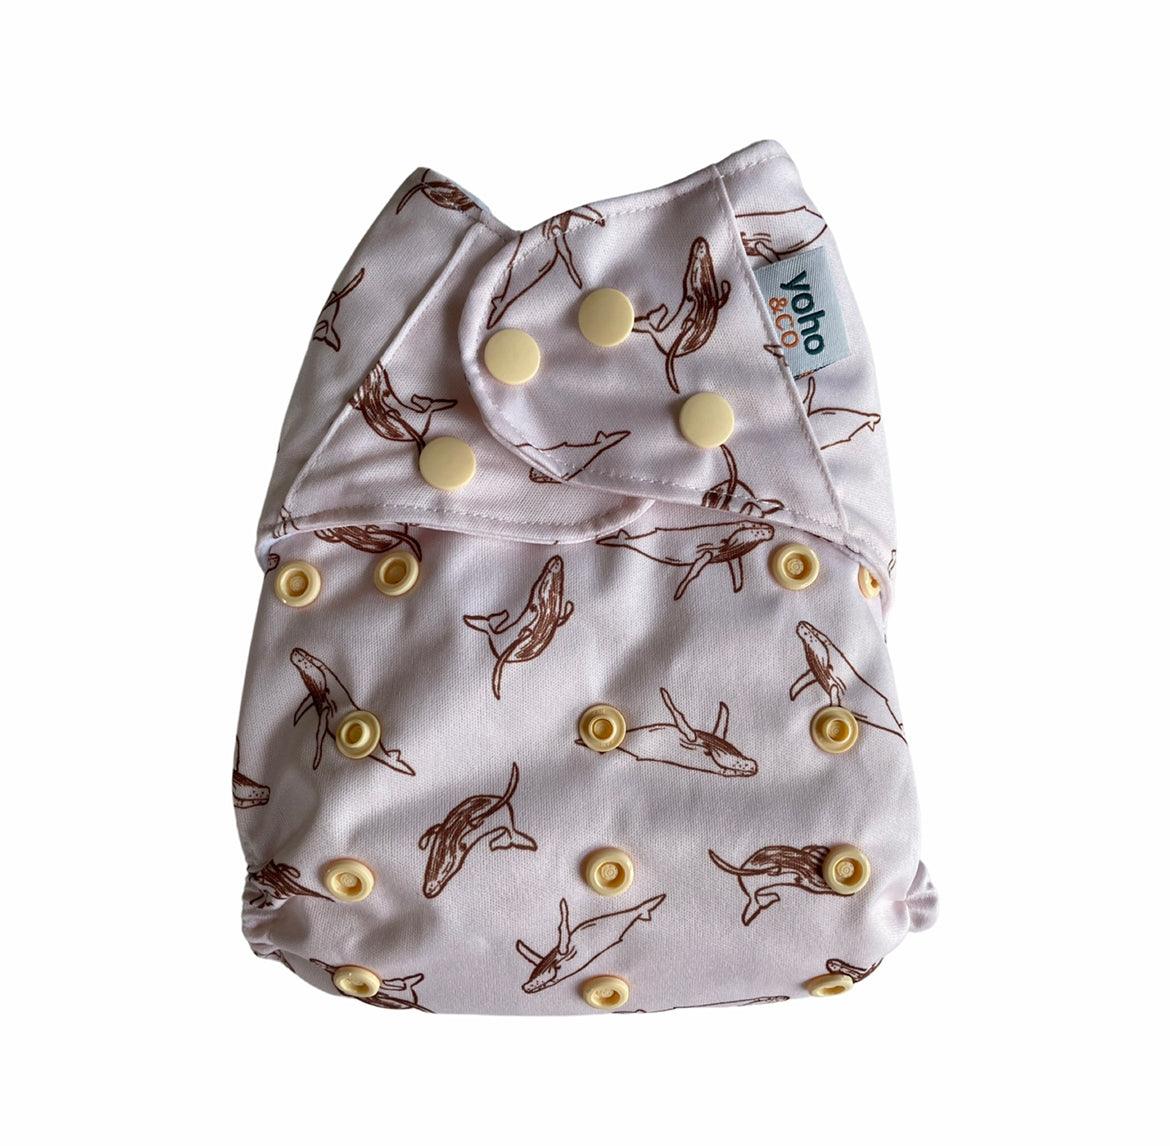 Yoho Baby & co. Reusable Classic Cotton Cloth Nappy NZ - Toffee Whales Print